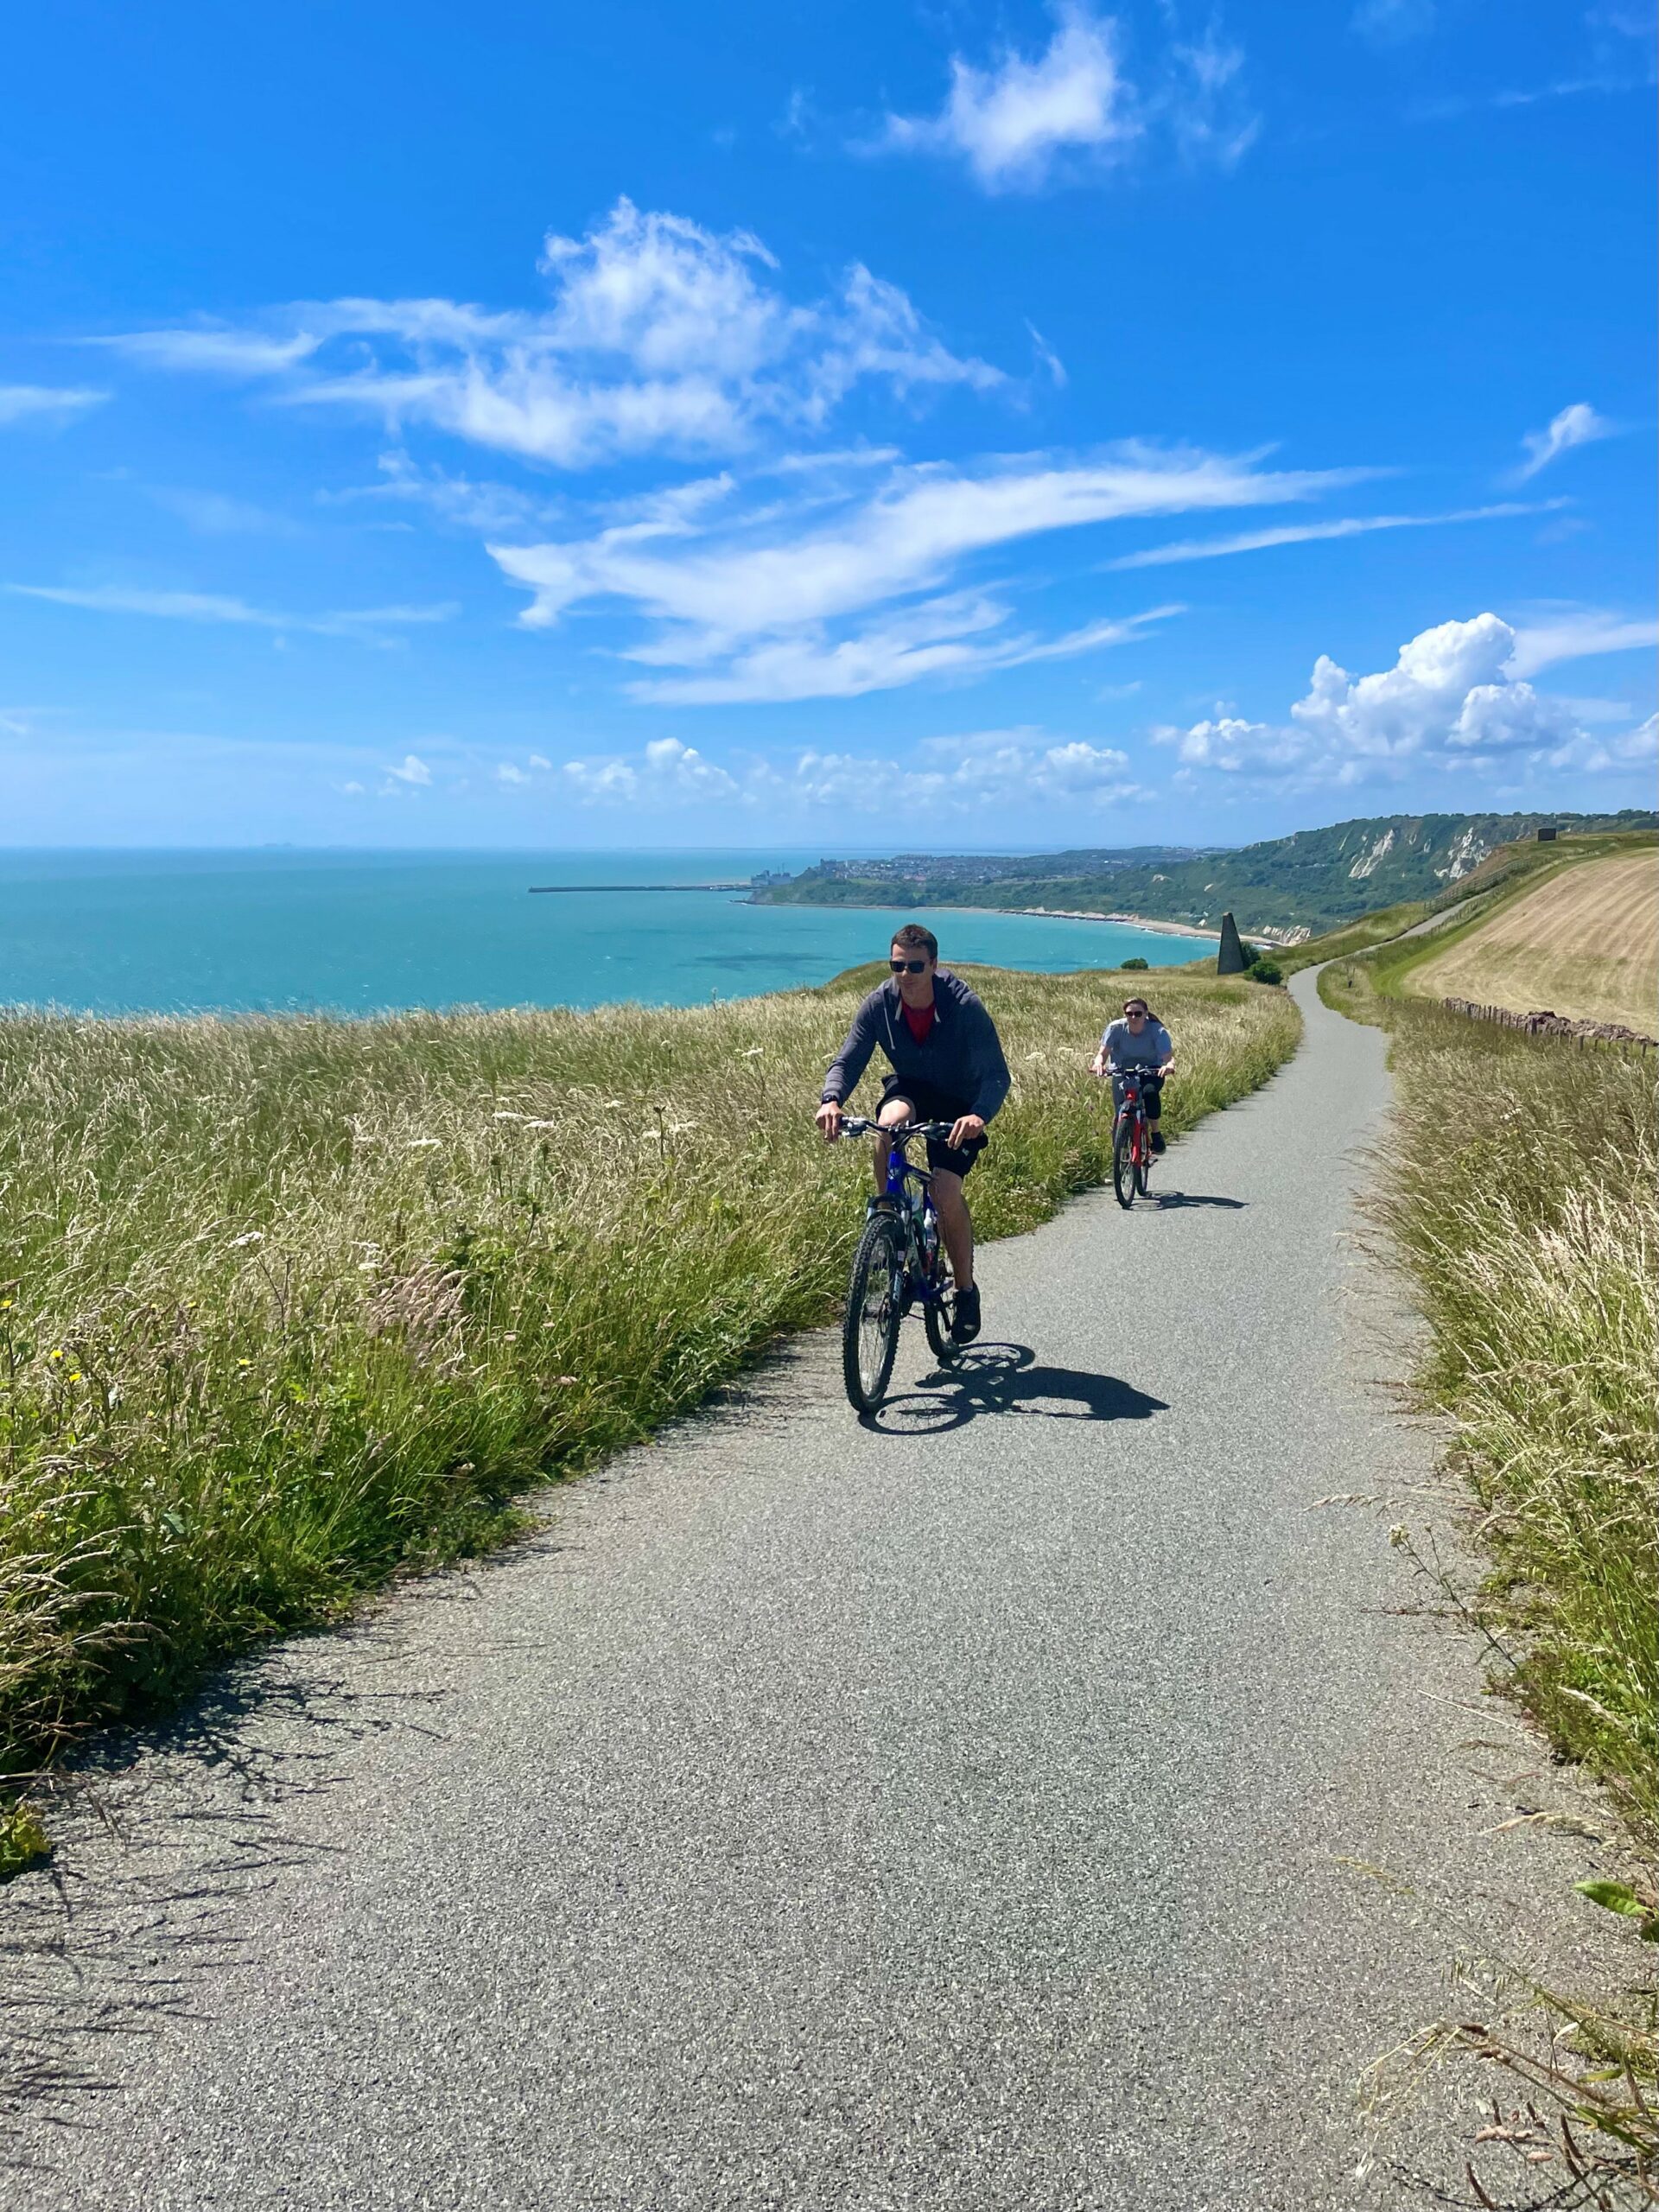 Two cyclists, on a cliff edge path, alongside the sea edge, on a sunny day.